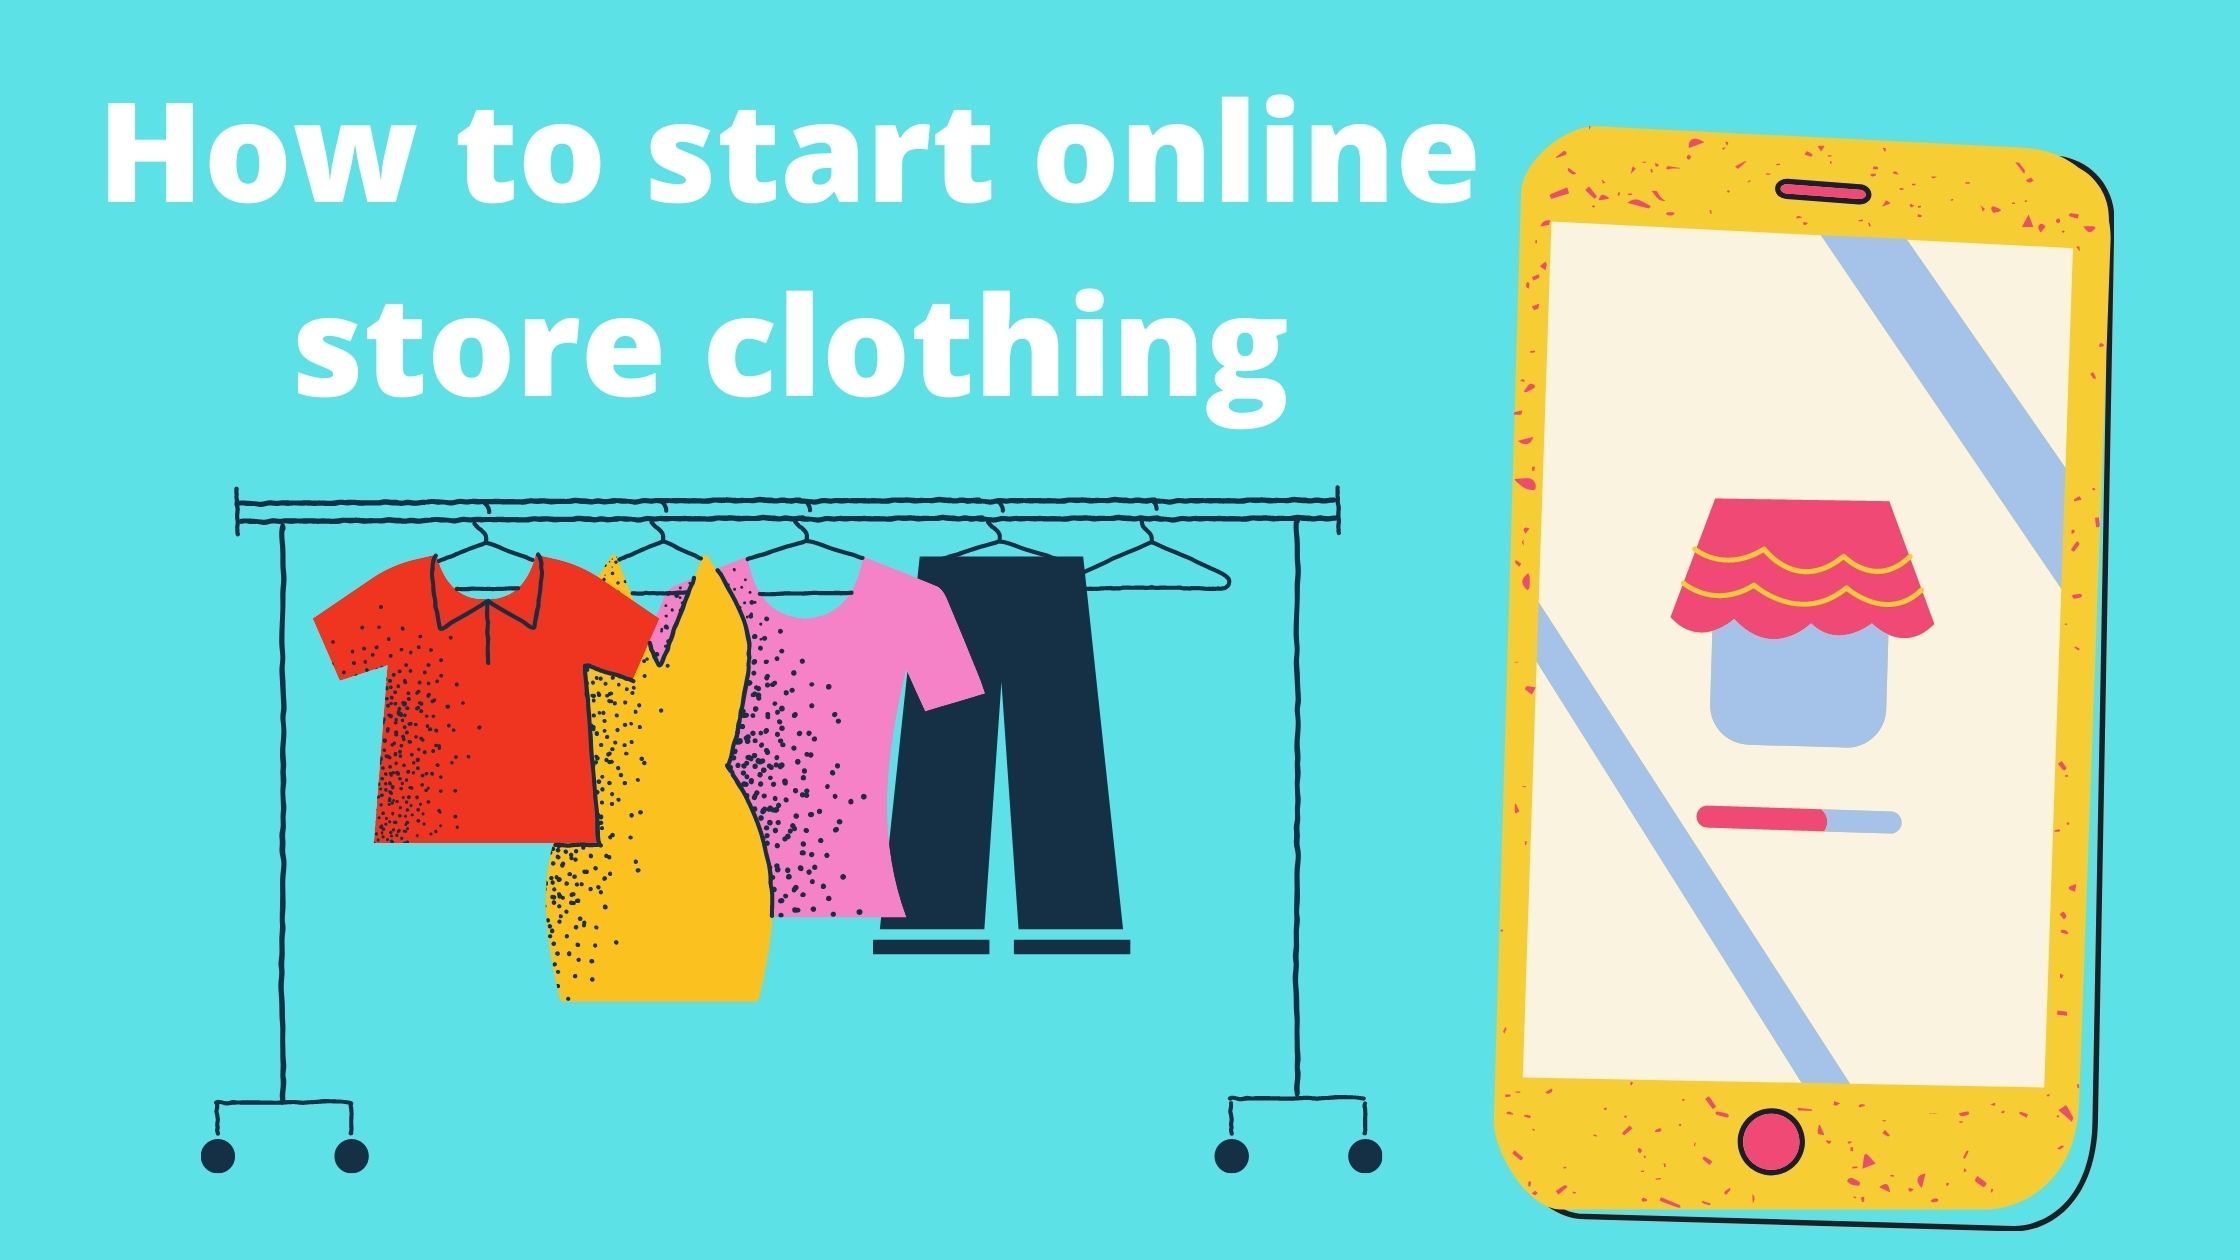 How to start online store clothing